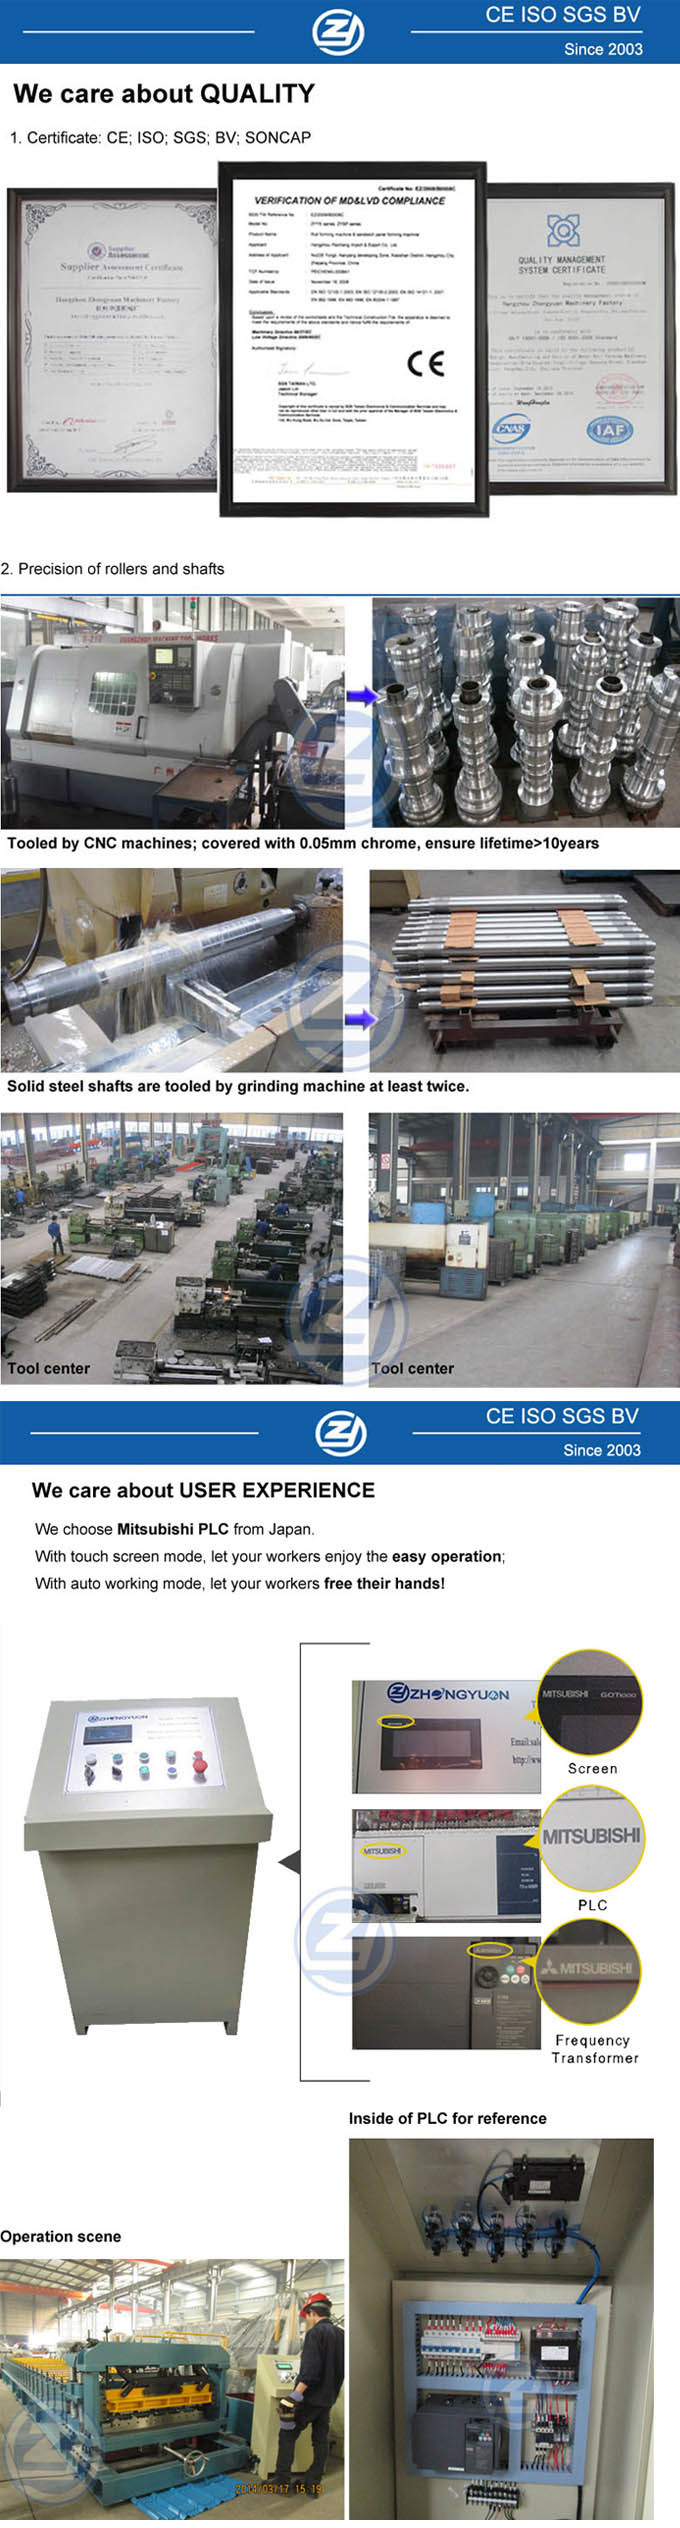 Metal Wall Panel CE Roll Forming Machine